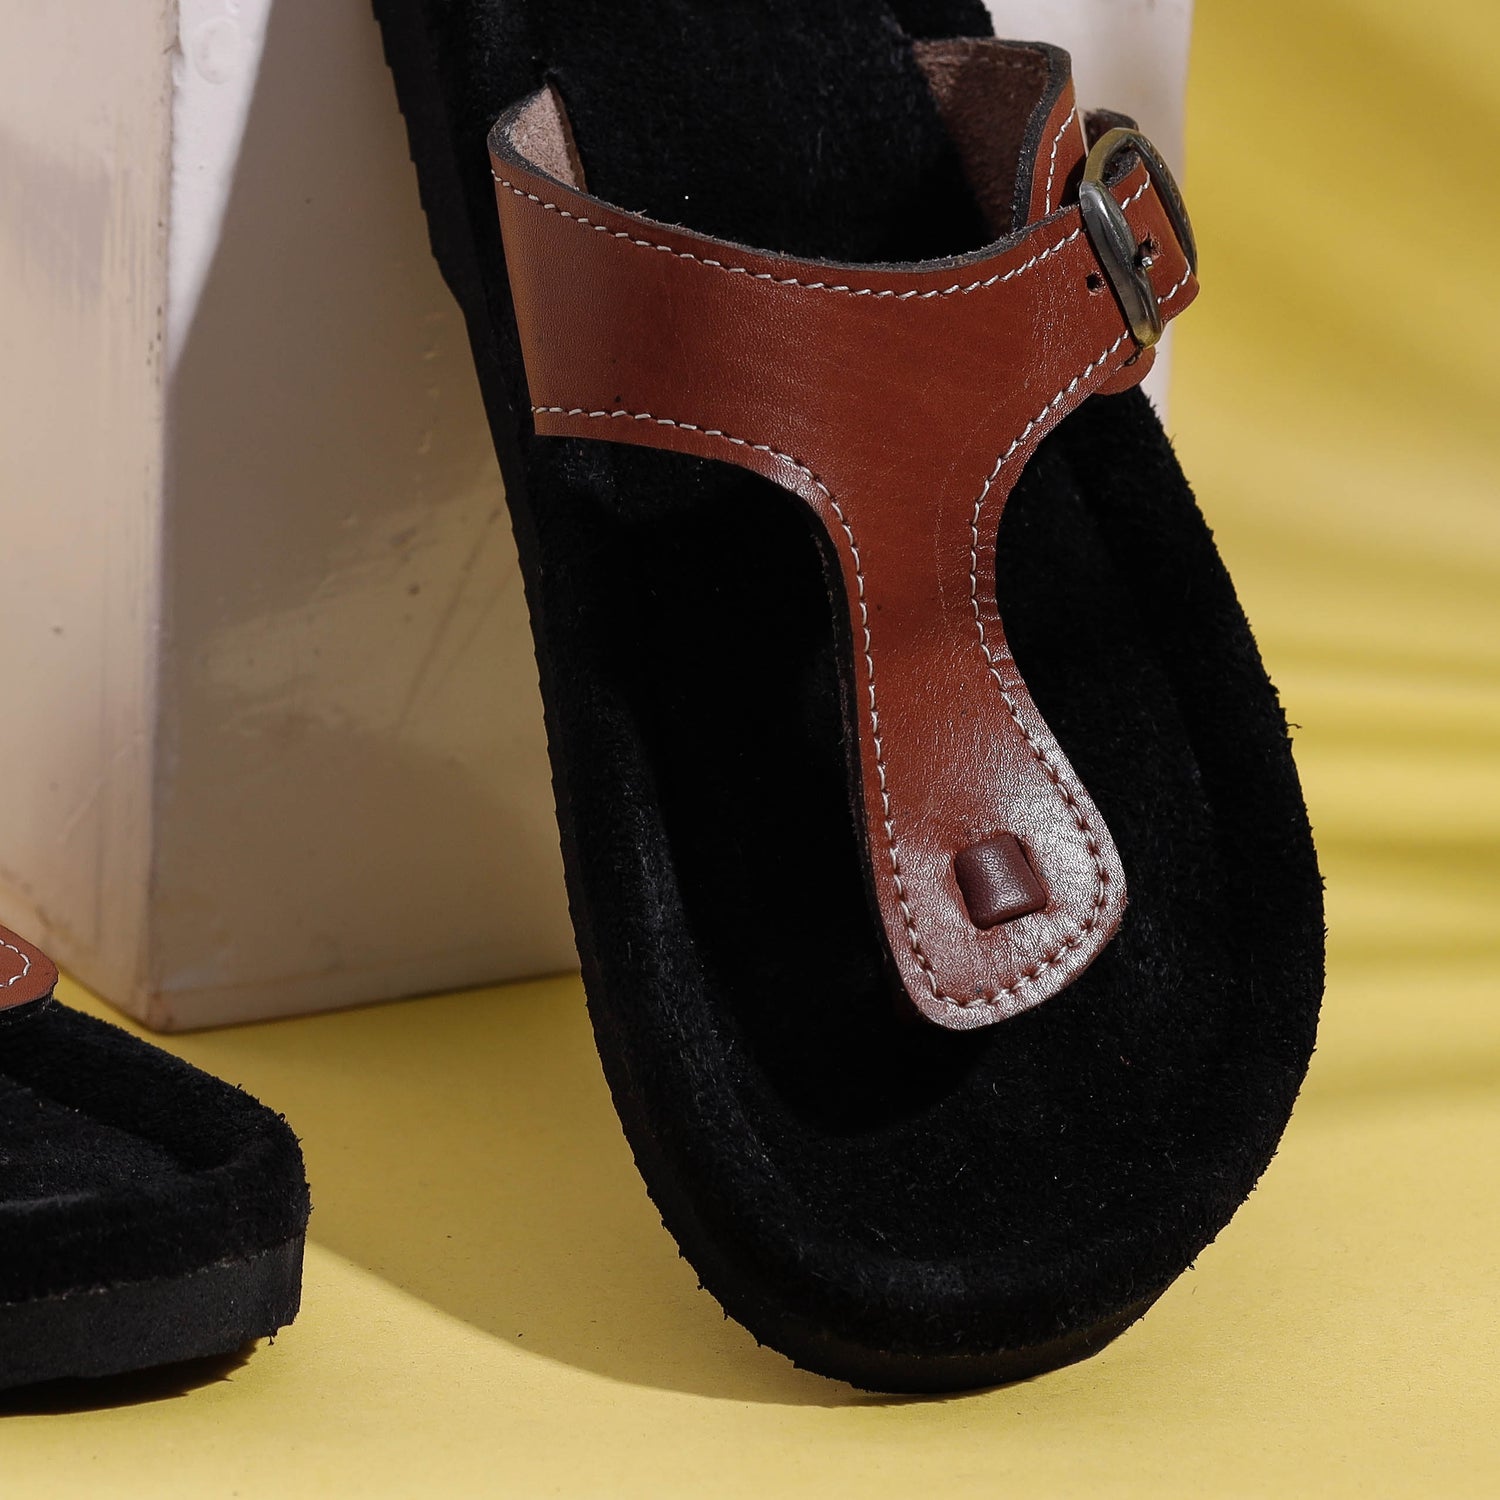 Black & Brown Handcrafted Women's Leather Slippers with Suede